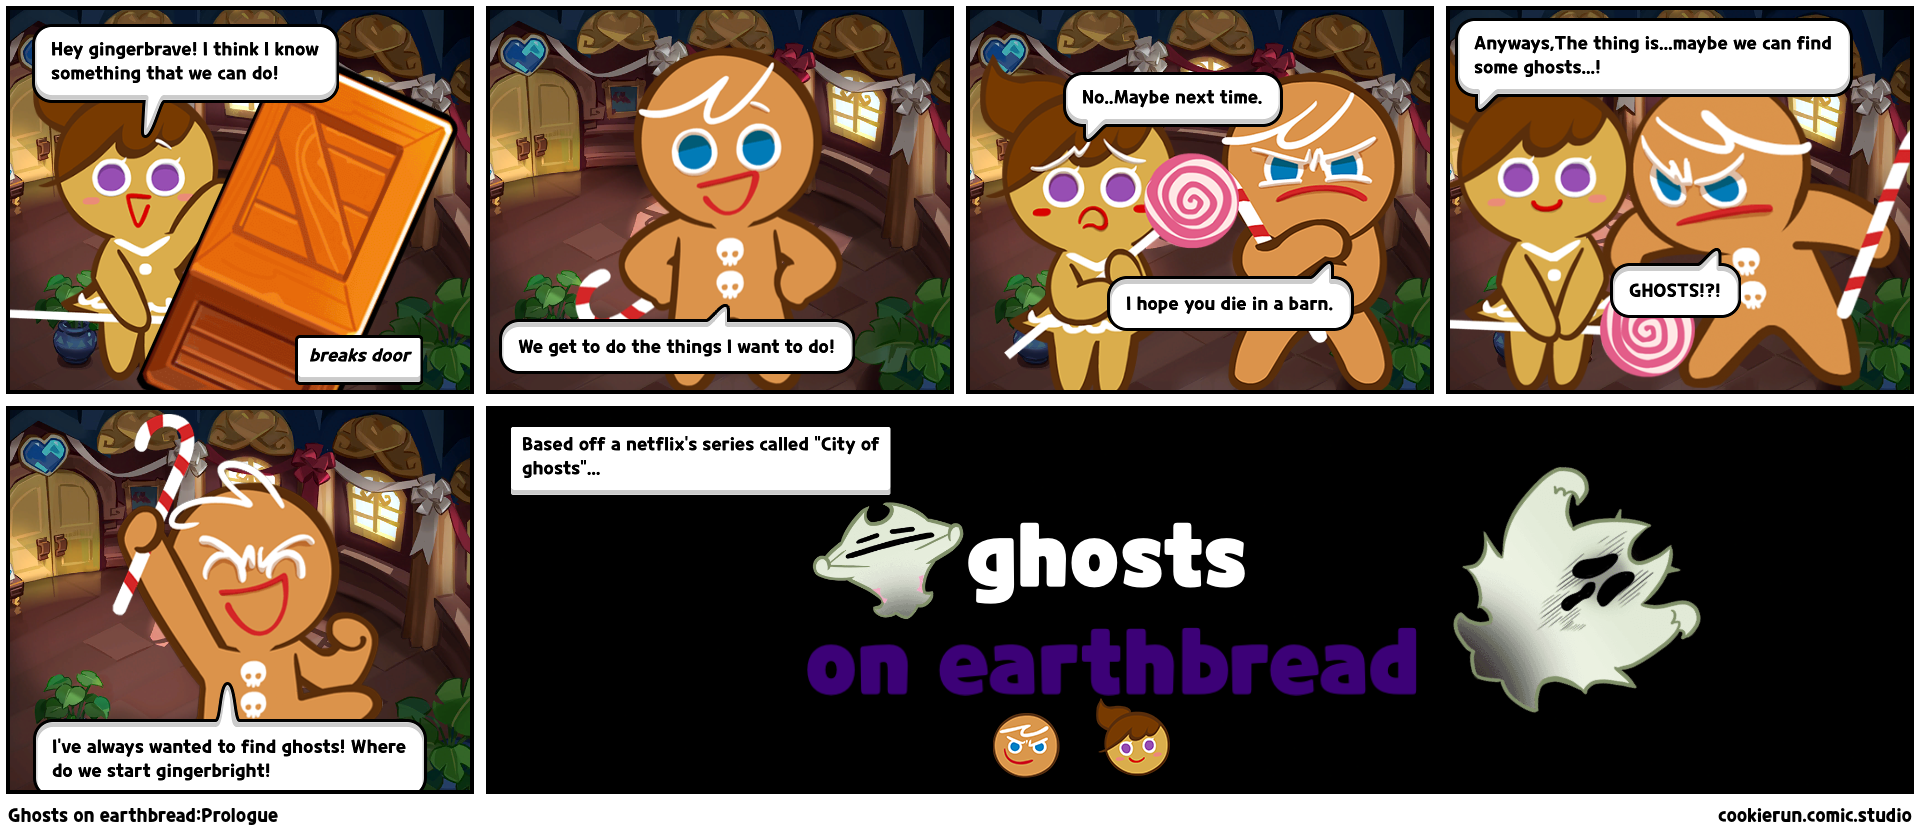 Ghosts on earthbread:Prologue